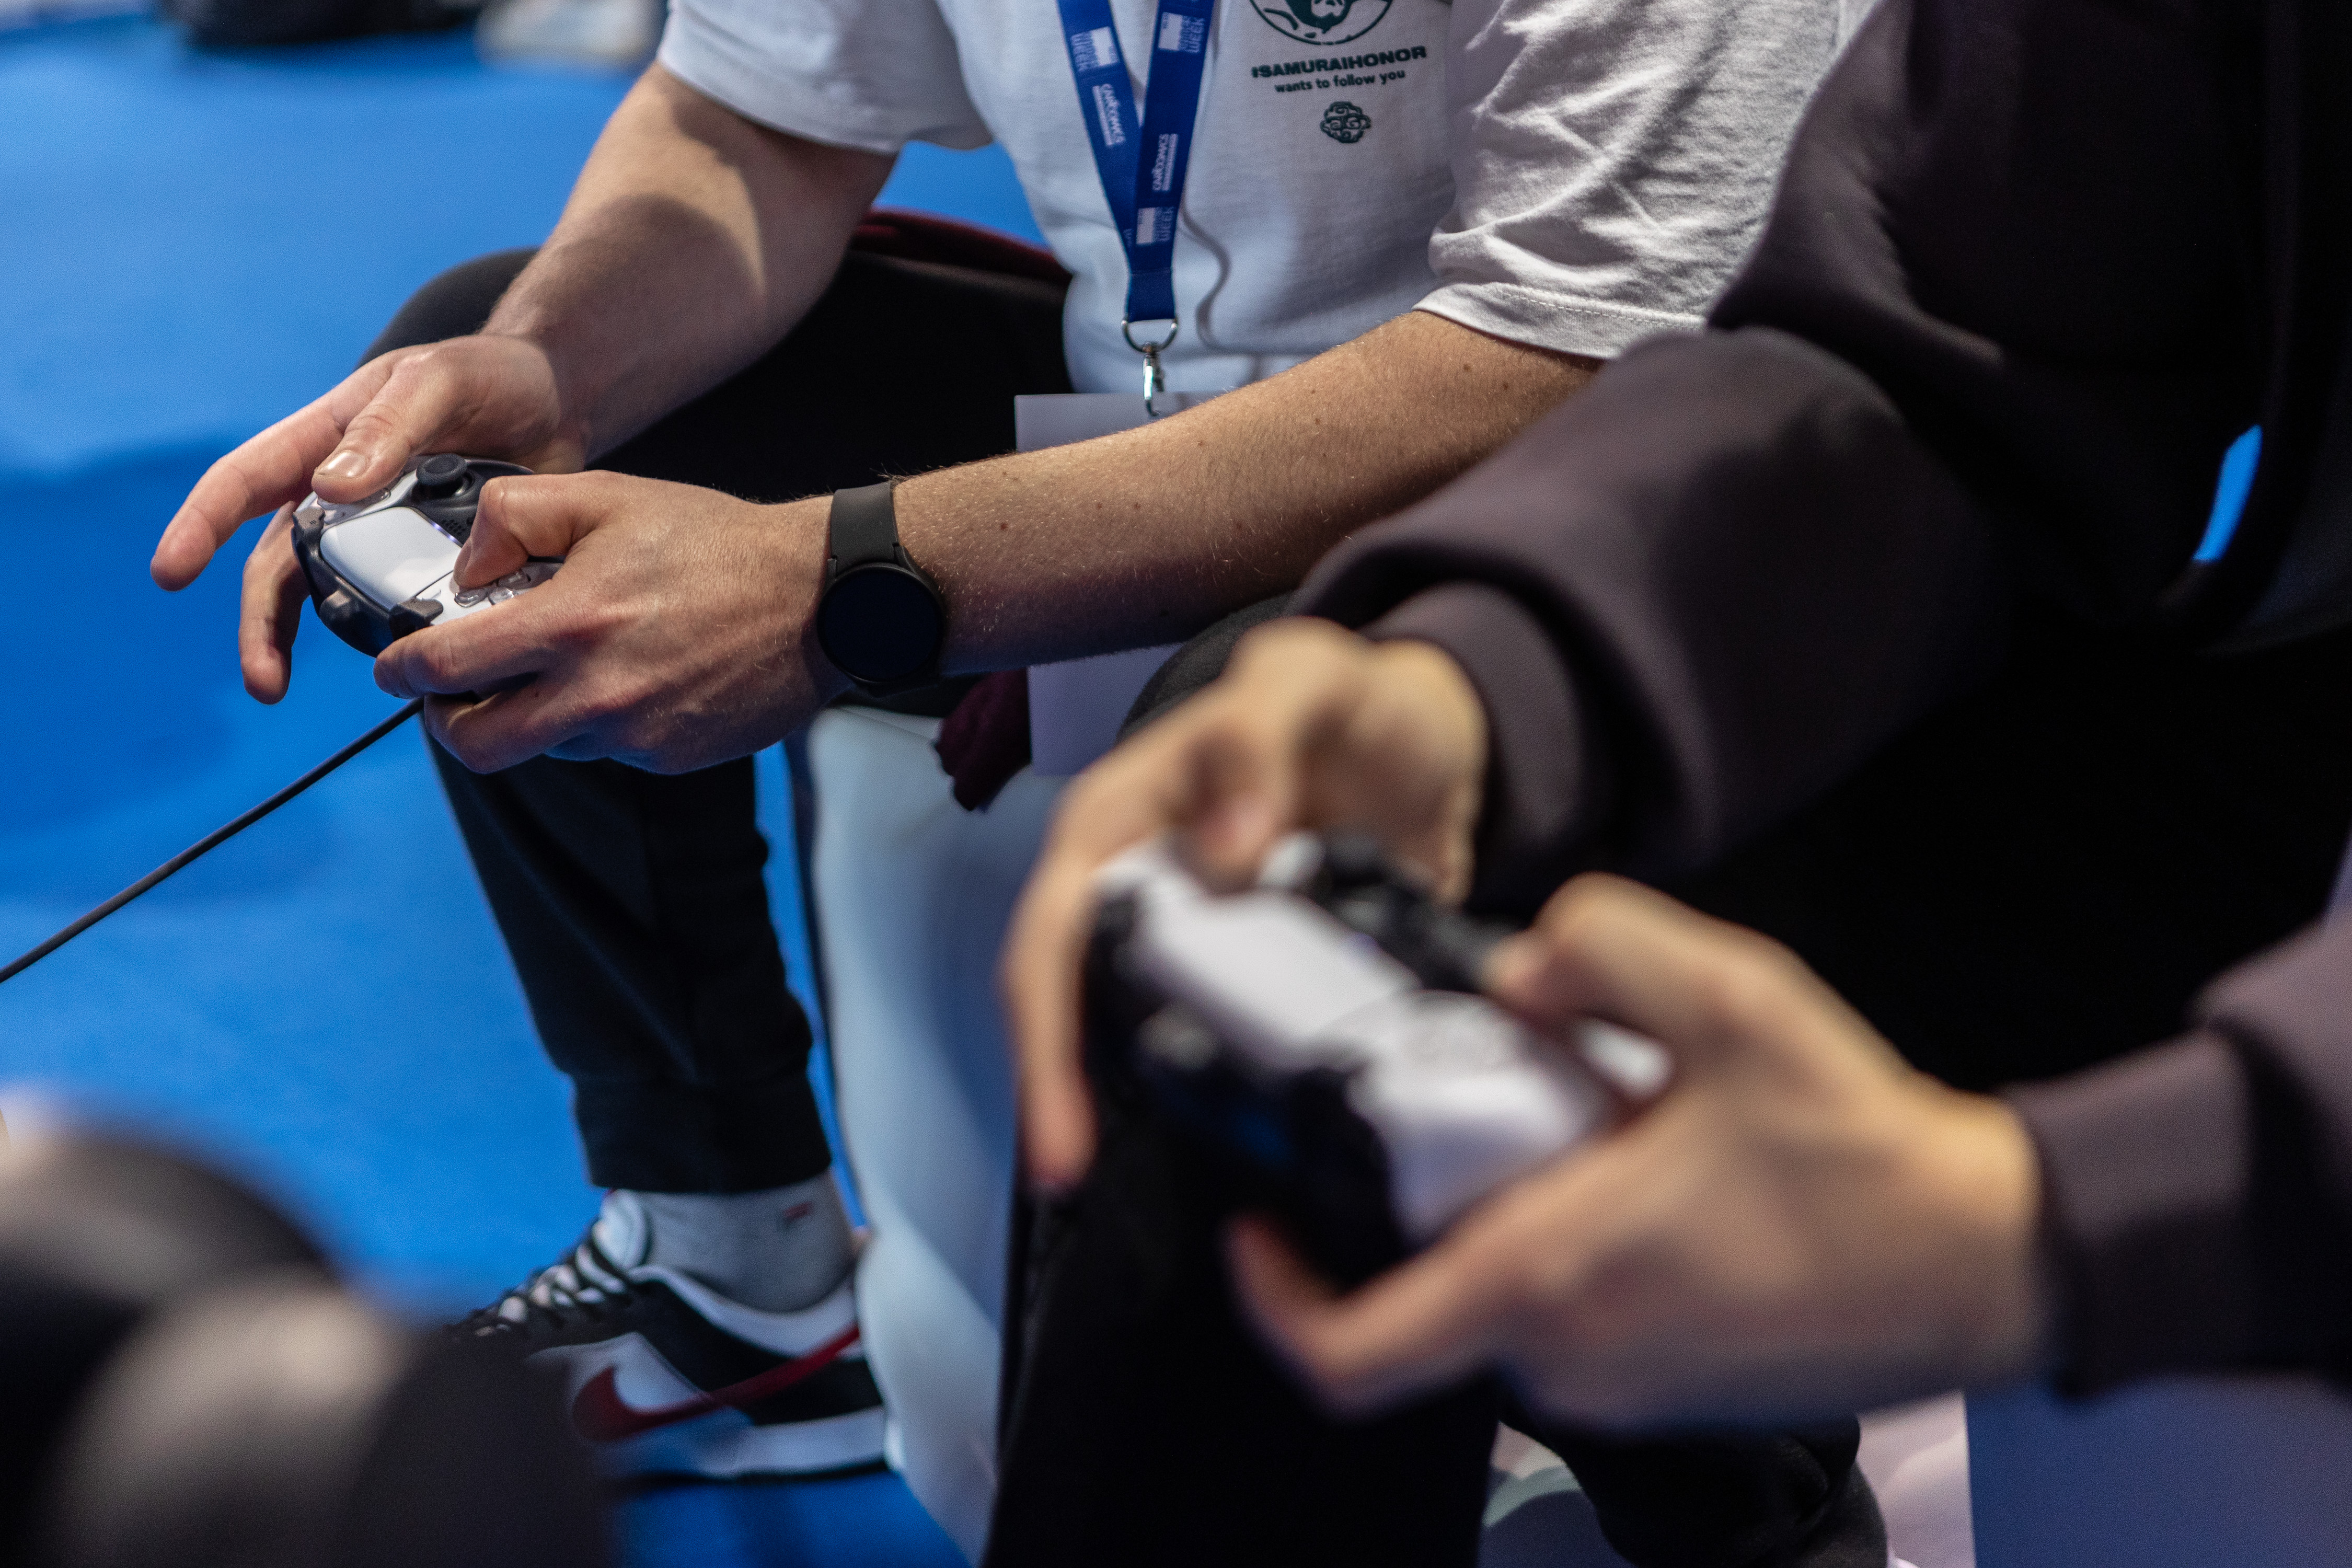 A close-up of two people holding PlayStation 5 controllers at an event.